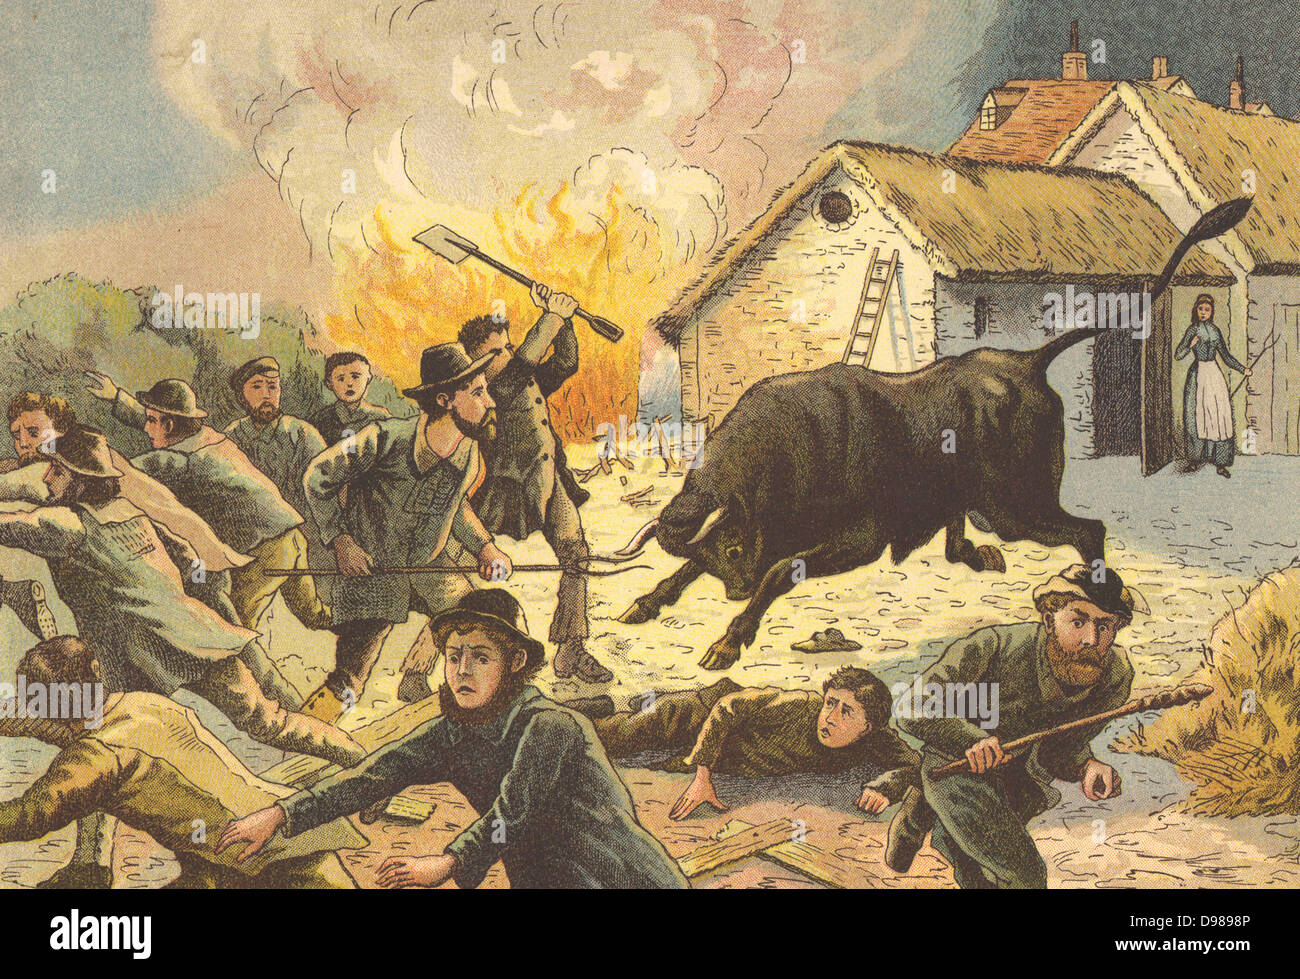 Farmer's wife letting out a bull to frighten off agricultural workers attacking a farm, c1830. Rick burning and machine wrecking widespread at this time as workers were afraid that threshing machines and other developments would depress wages and destroy jobs. Chromolithograph 1880s. Stock Photo